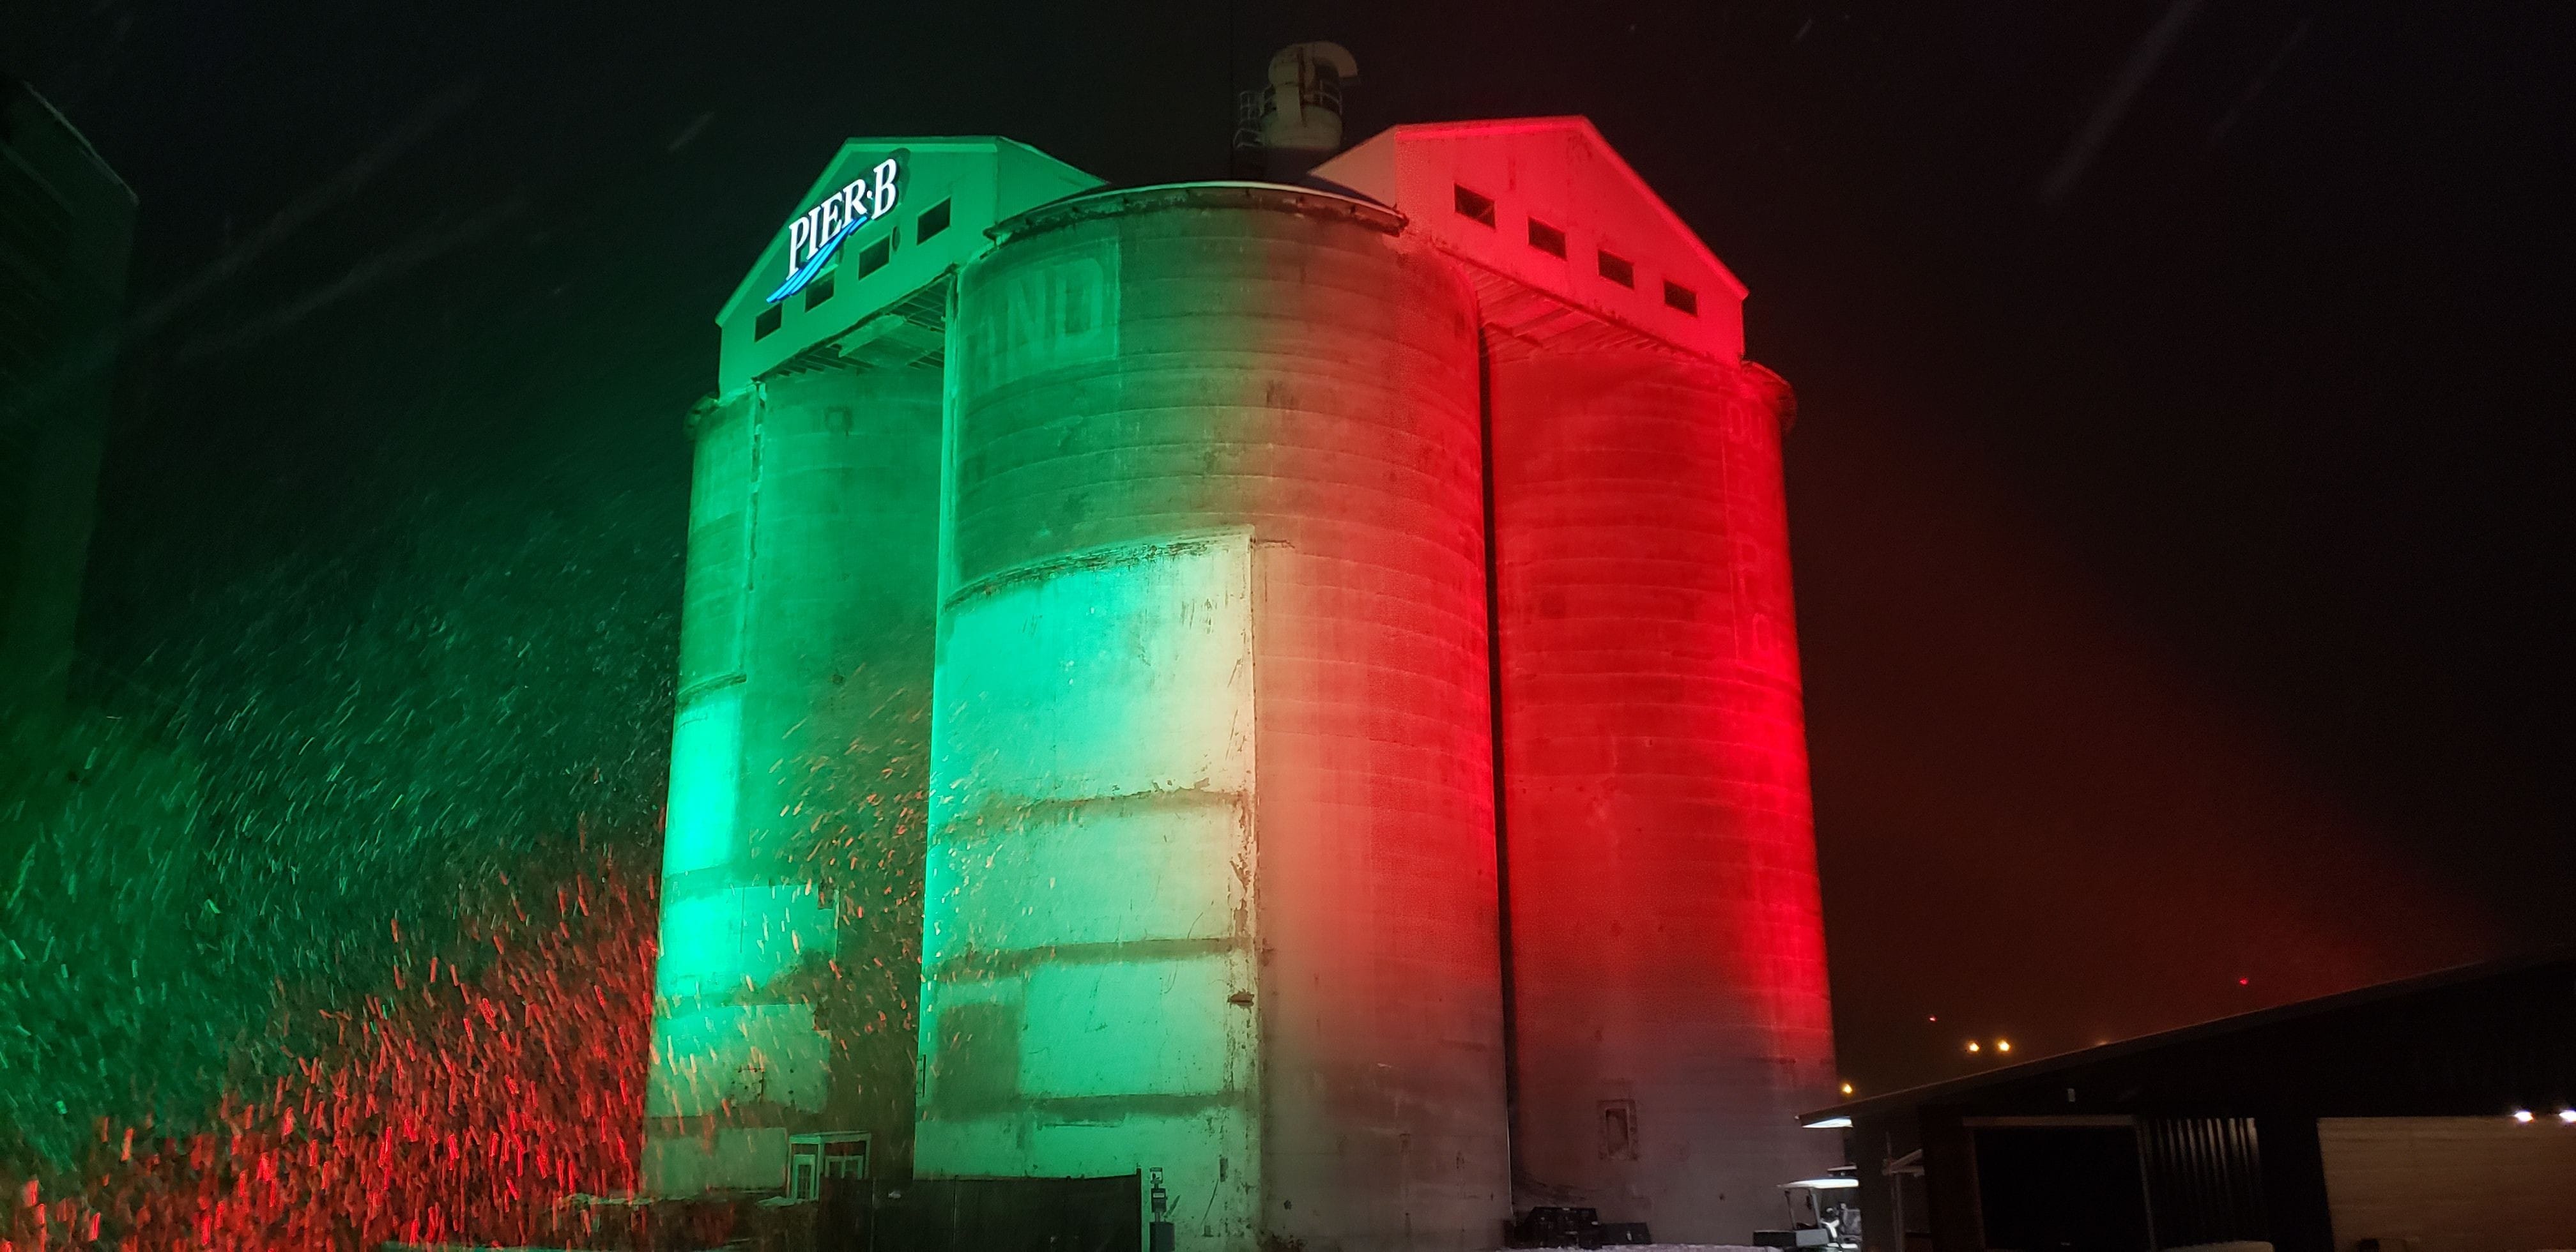 Pier B silos lit in red and green for holiday lighting by Duluth Event Lighting